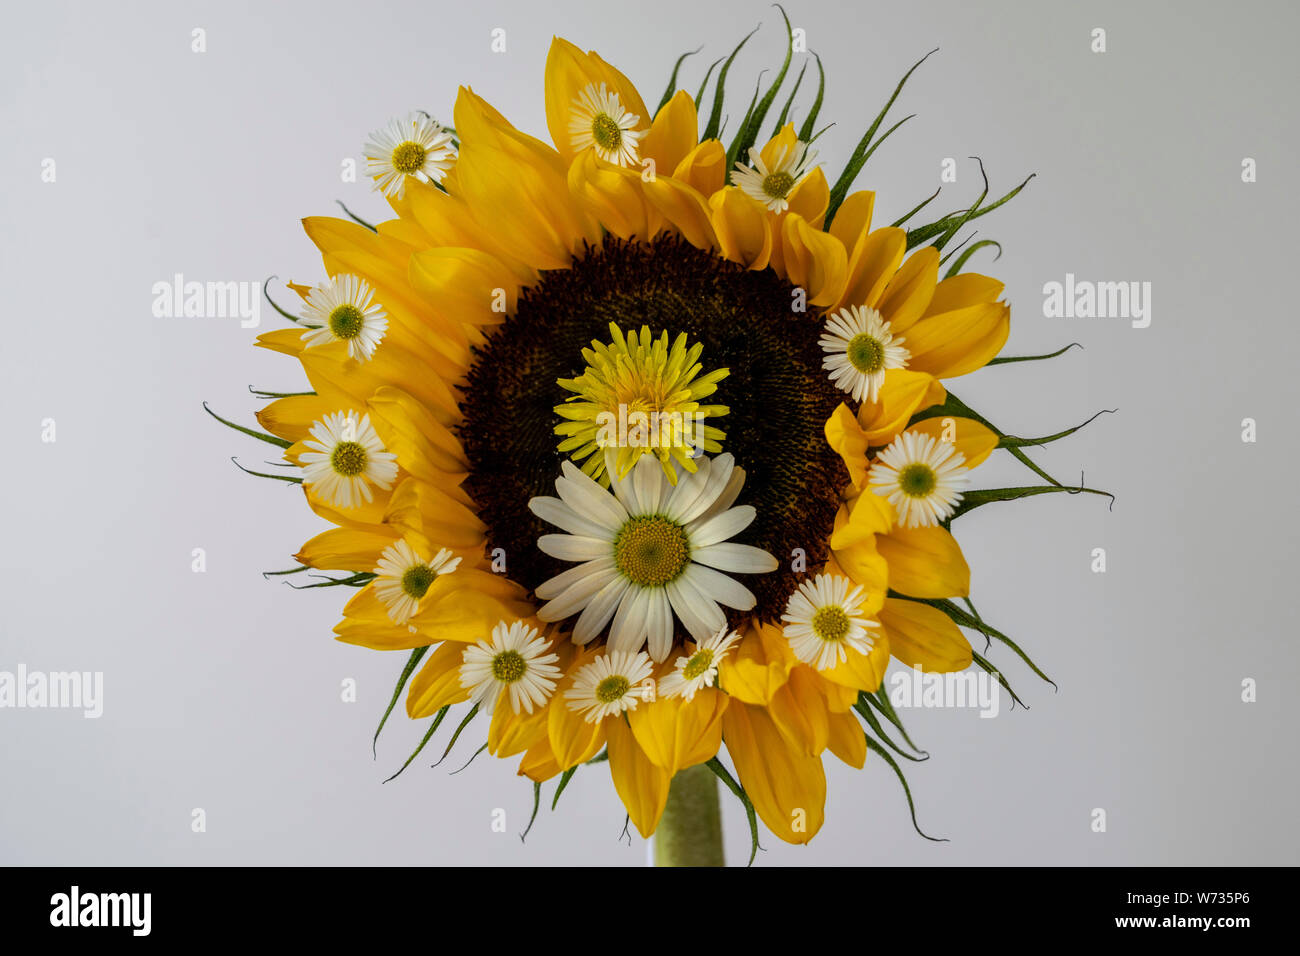 A close-up image of a sunflower decorated with two types of wild daisies and a dandelion head.The delicate garden daisy and the ox-eye daisy. Stock Photo